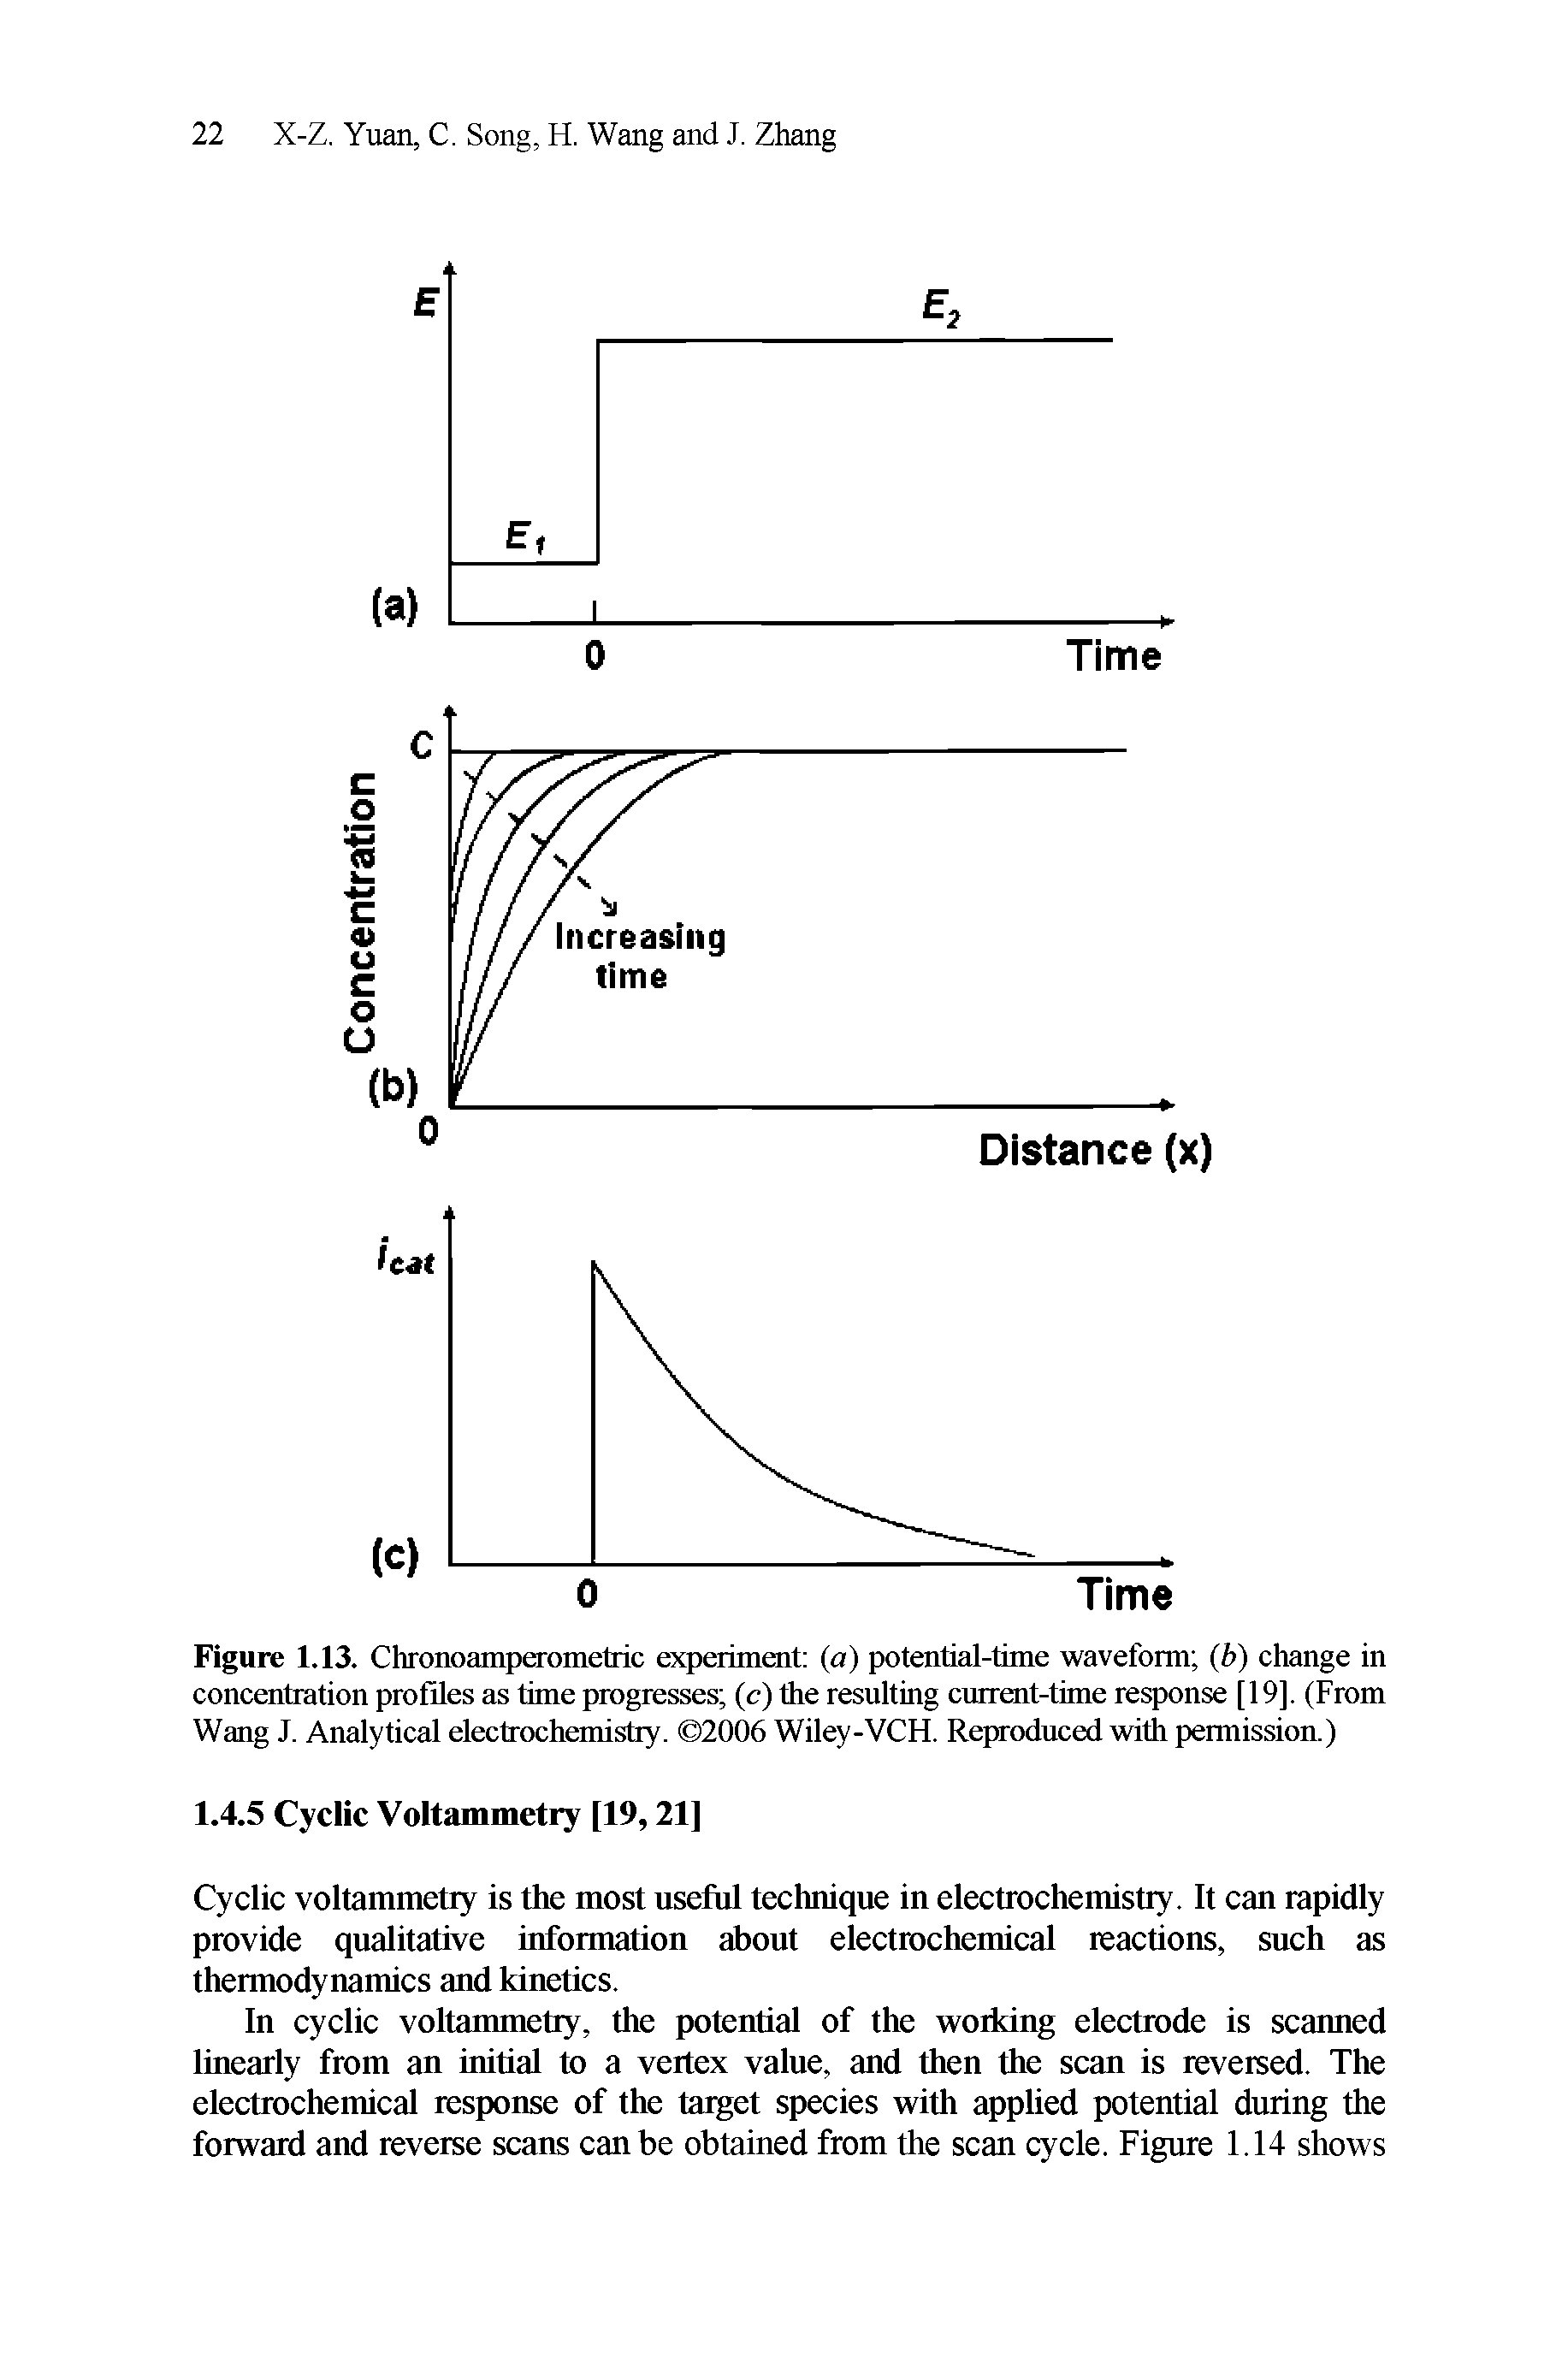 Figure 1.13. Chronoamperometric experiment (a) potential-time waveform (b) change in concentration profiles as time progresses (c) the resulting current-time response [19]. (From Wang J. Analytical electrochemistry. 2006 Wiley-VCH. Reproduced with permission.)...